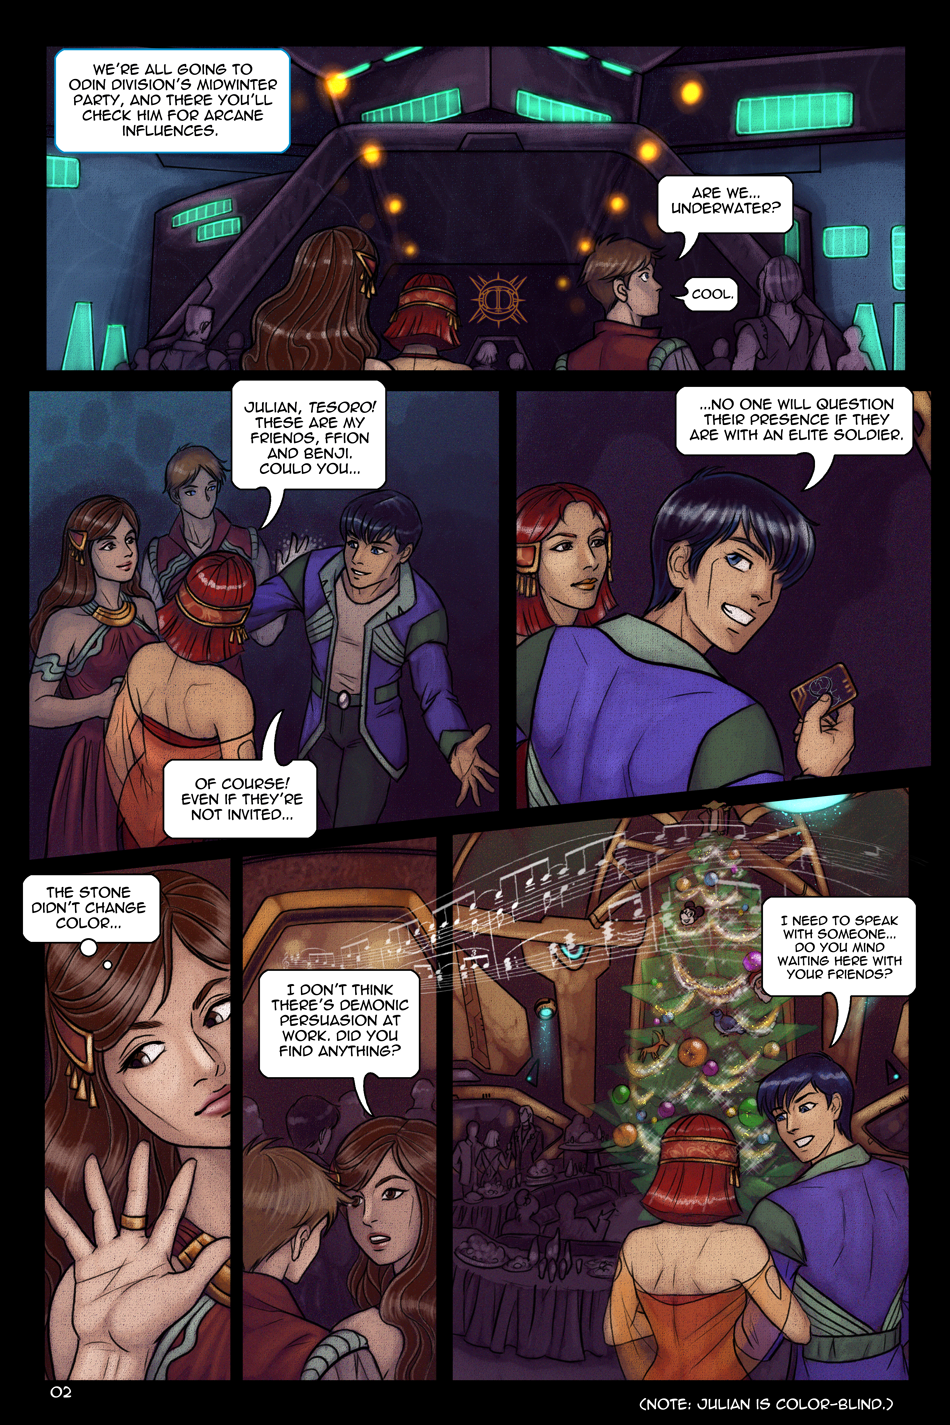 The Strangest Coven by Whiteshaix Page 2 of 4